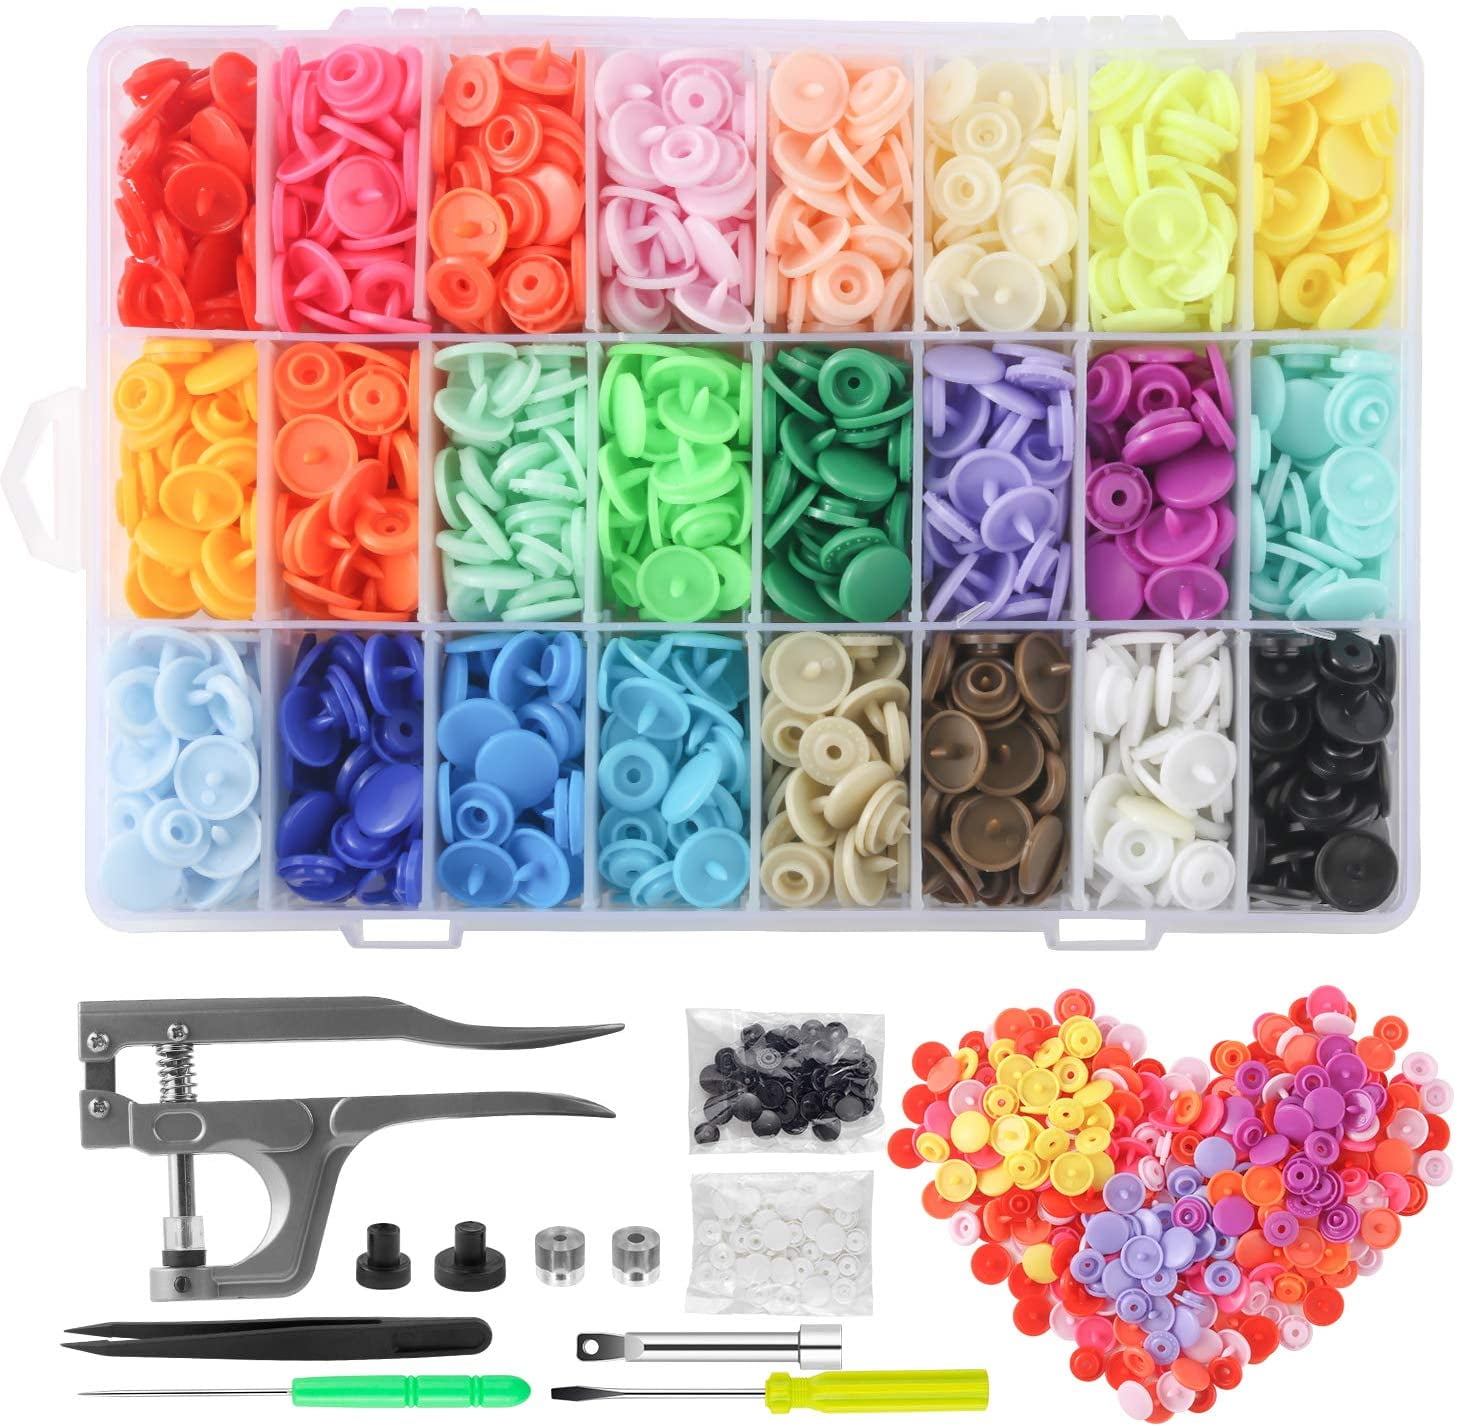 Plastic Snaps With Snap Pliers, 460 Sets 24-colors Snap Buttons For Sewing,  Snap Fasteners Kit For Sewing, Clothing, Crafting, Diaper, Bibs